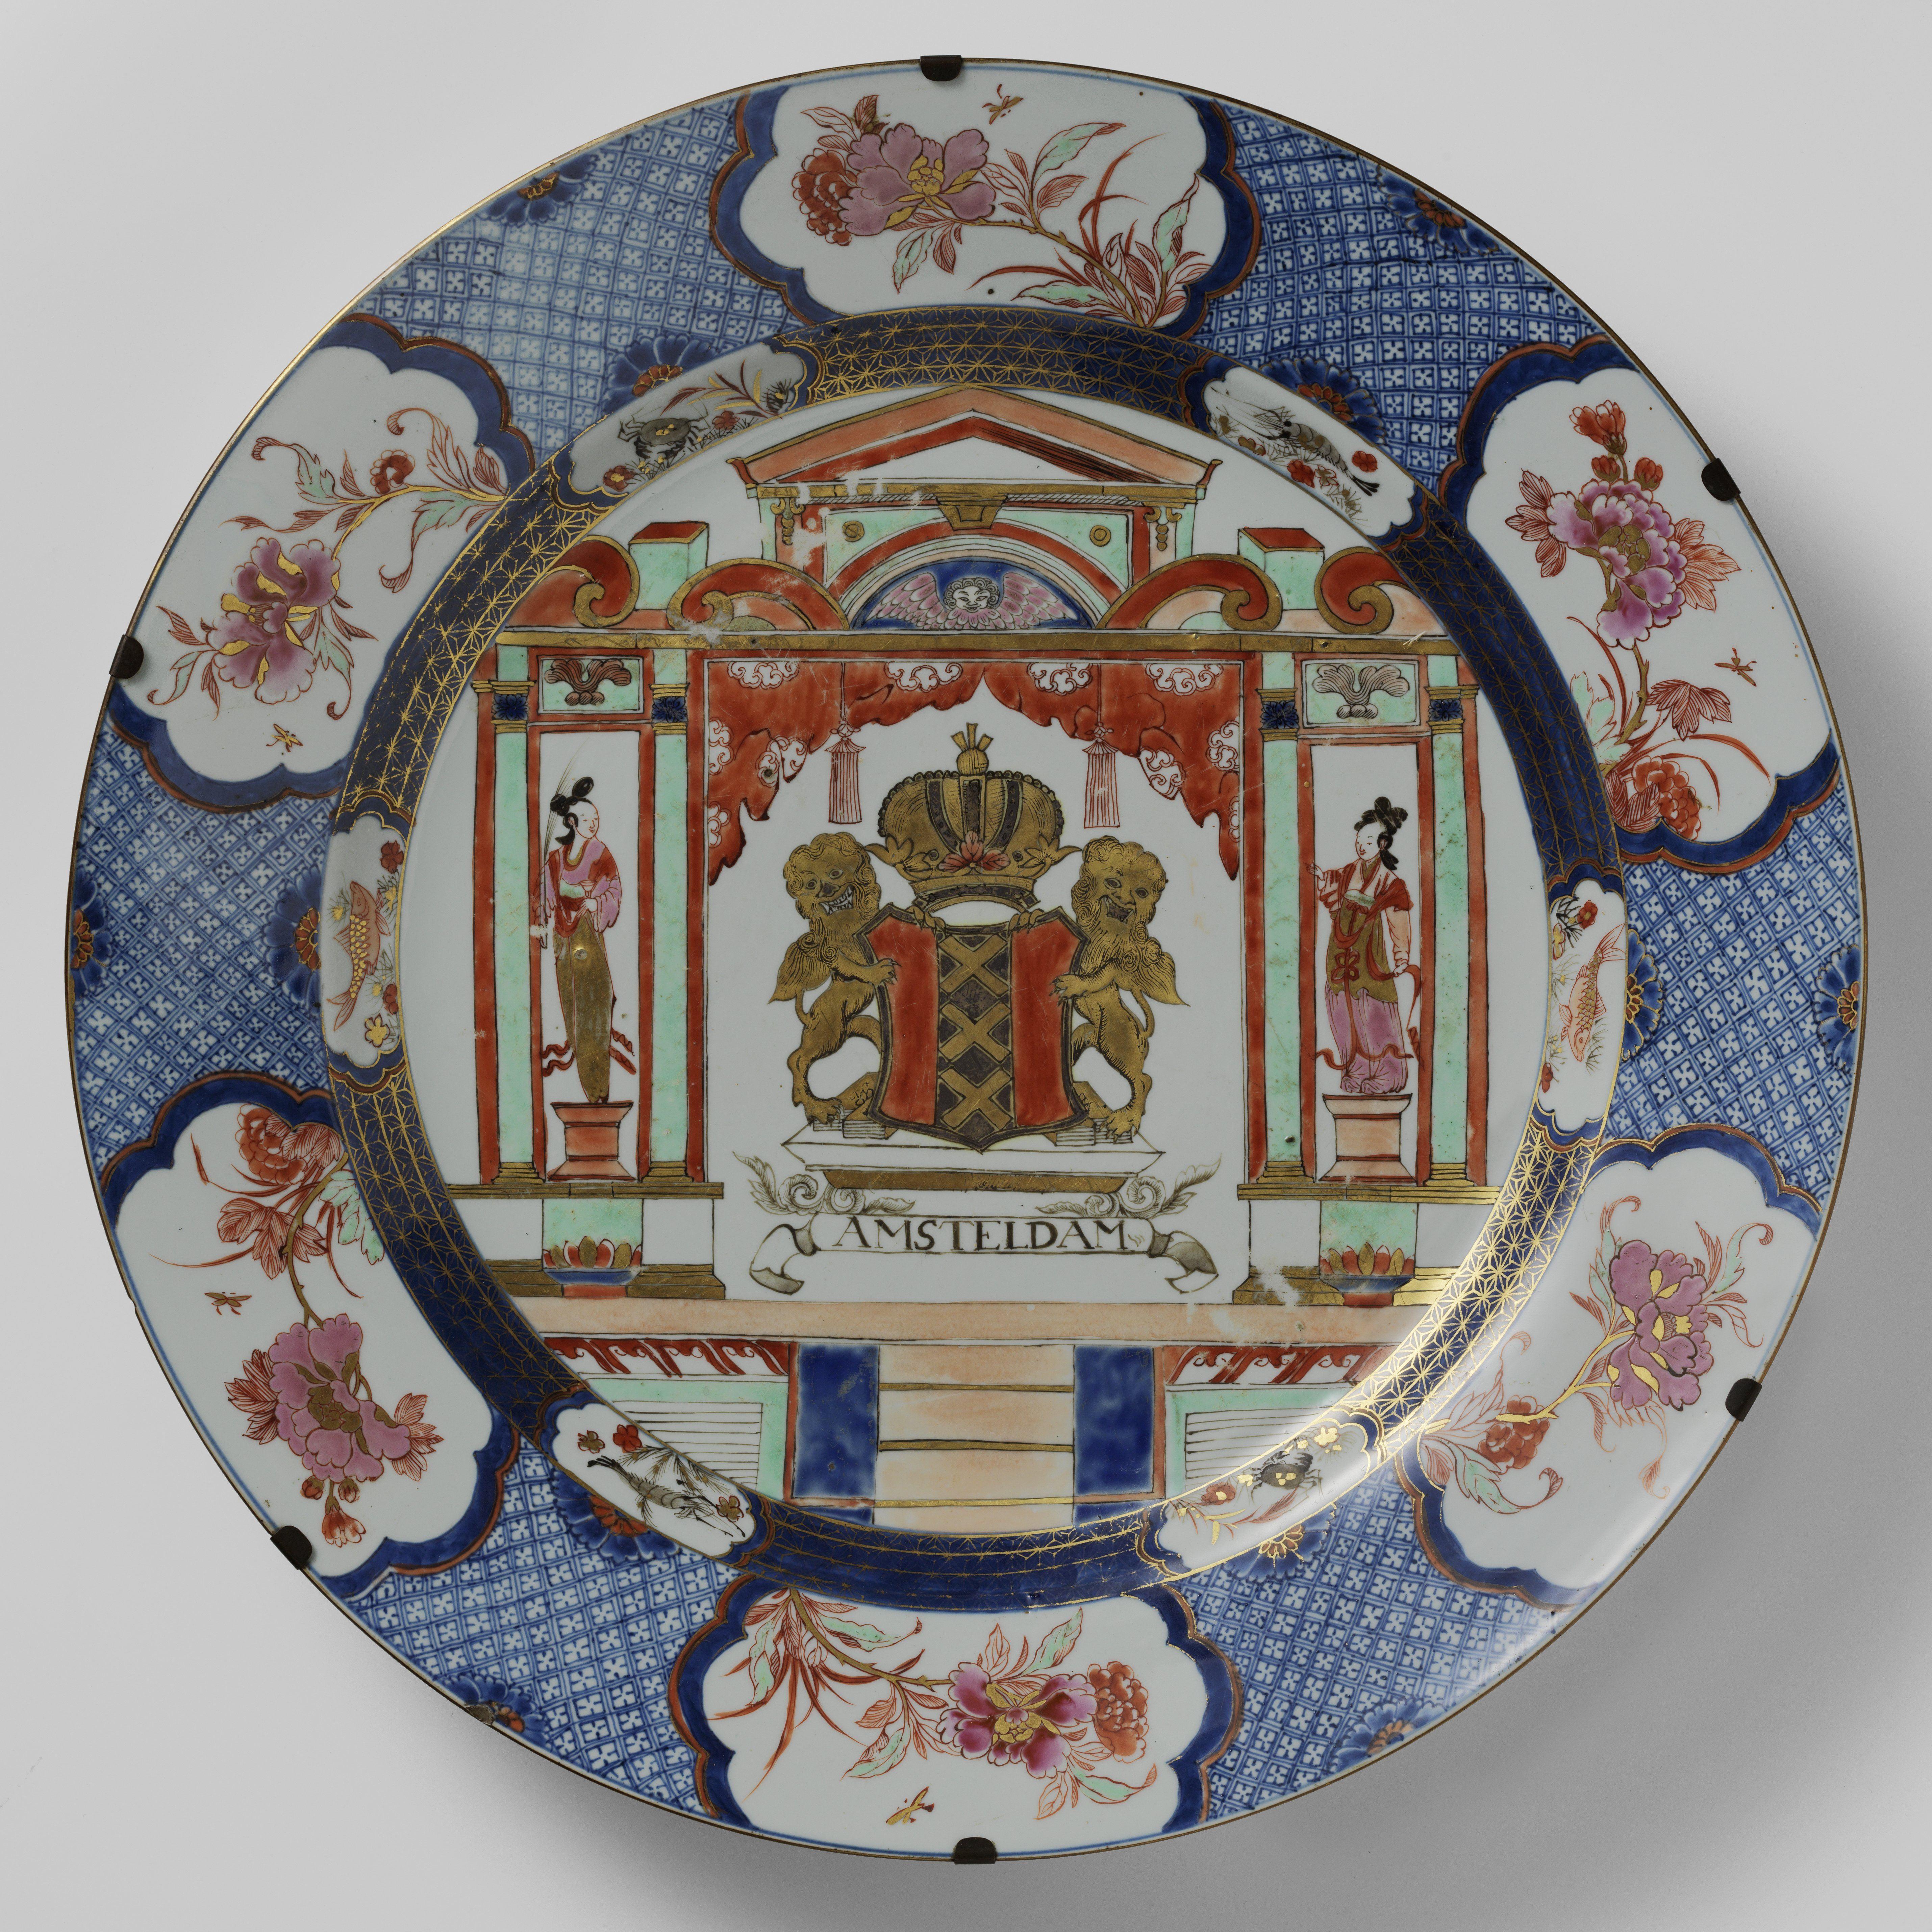 An extremely rare and large Chinese export famille rose armorial porcelain charger with the Amsterdam coat-of-arms

Qianlong period, circa 1720-1725

Diam. 54 cm

Two gilt lions hold the Amsterdam coat-of-arms in the centre of the dish with a